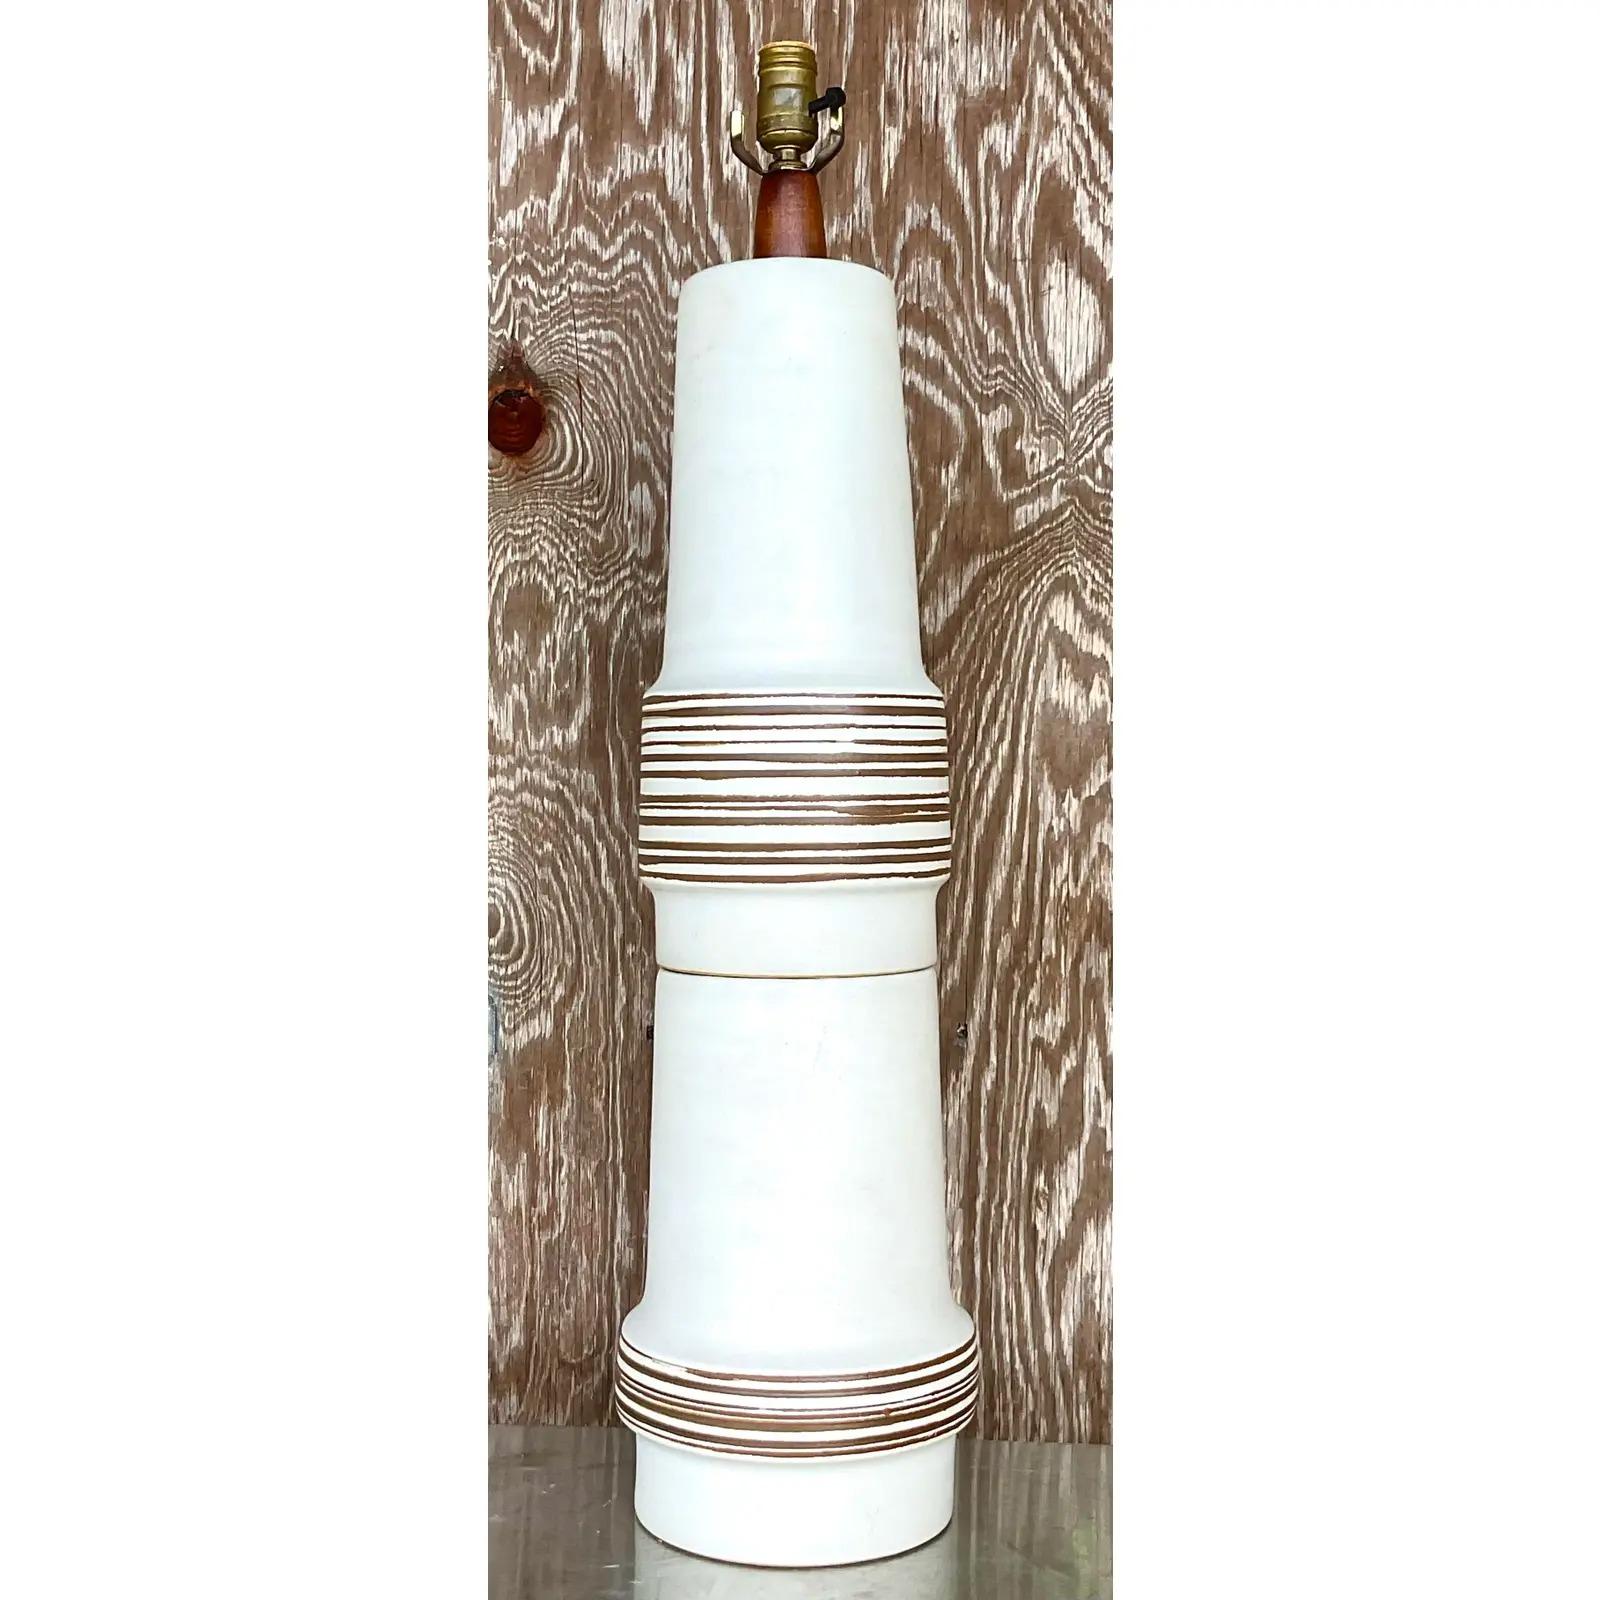 Fantastic vintage MCM table lamp. Made by the iconic Gordon and Jane Martz. A chic stacked ceramic body with a matte finish and hand painted center stripes. Signed on the bottom. Acquired from a Palm Beach estate.